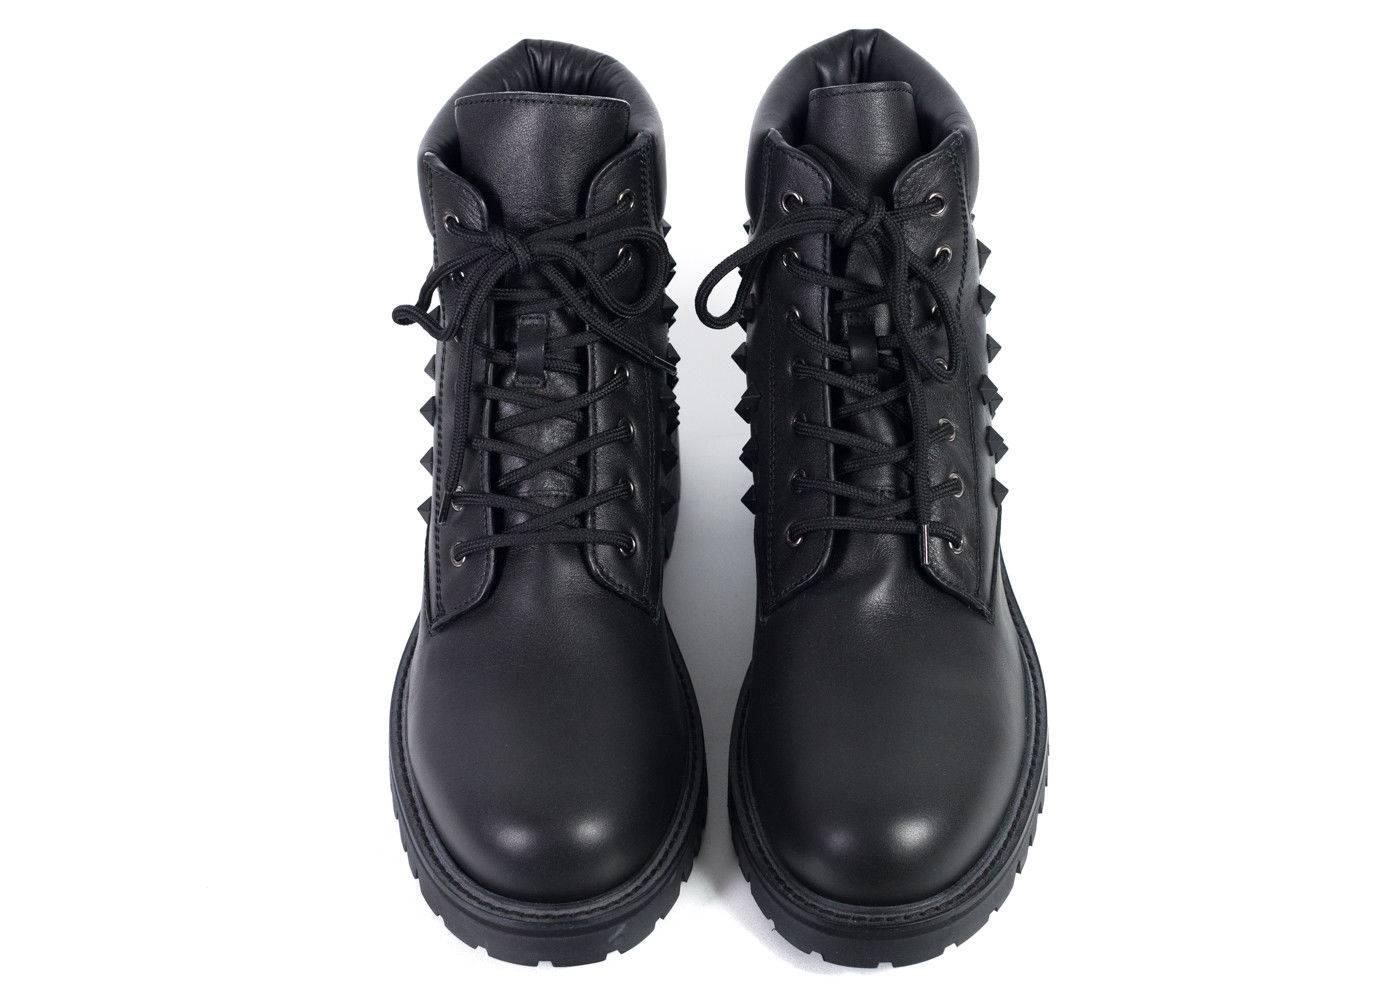 Brand New Valentino Men's Combat Boots
Original Box & Dust Bag Included
Retails in Stores & Online for $1345
Size IT44 / US11 Fits True to Size

Valentino's rendition of a classic black combat boot with their house's signature rocketed